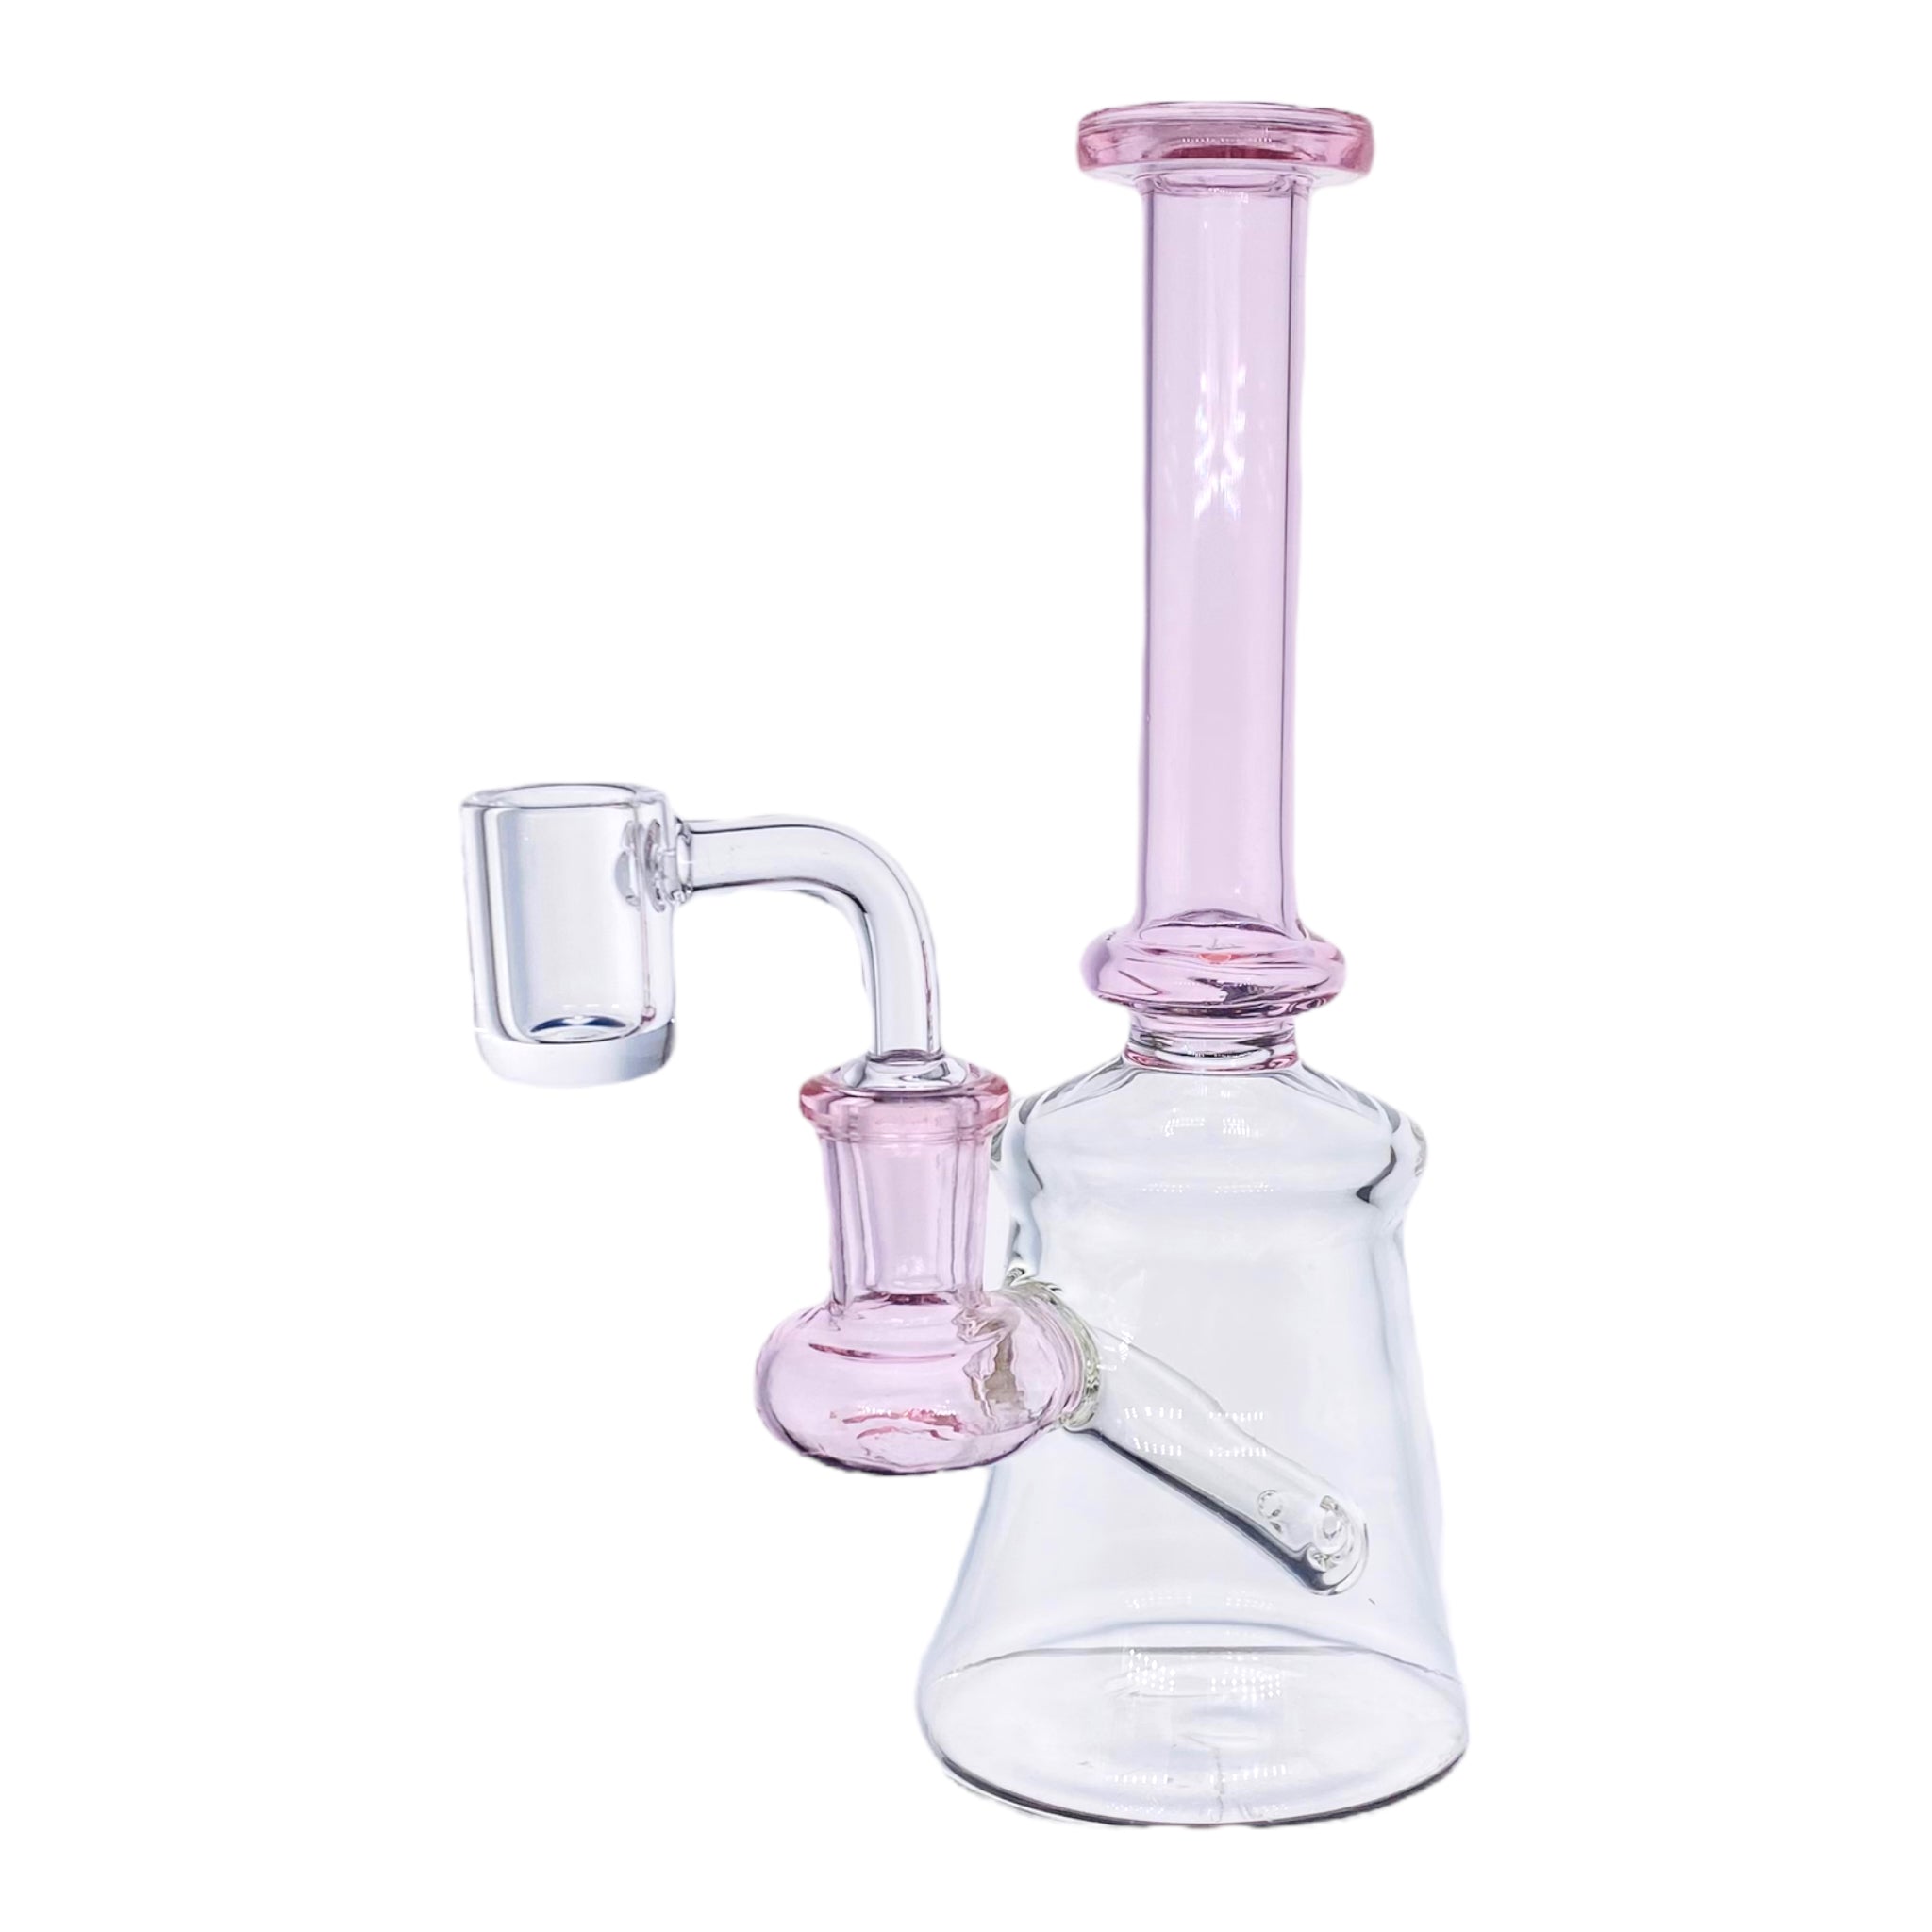 Cute girly Mini Tube Dab Rig With Pink Mouthpiece